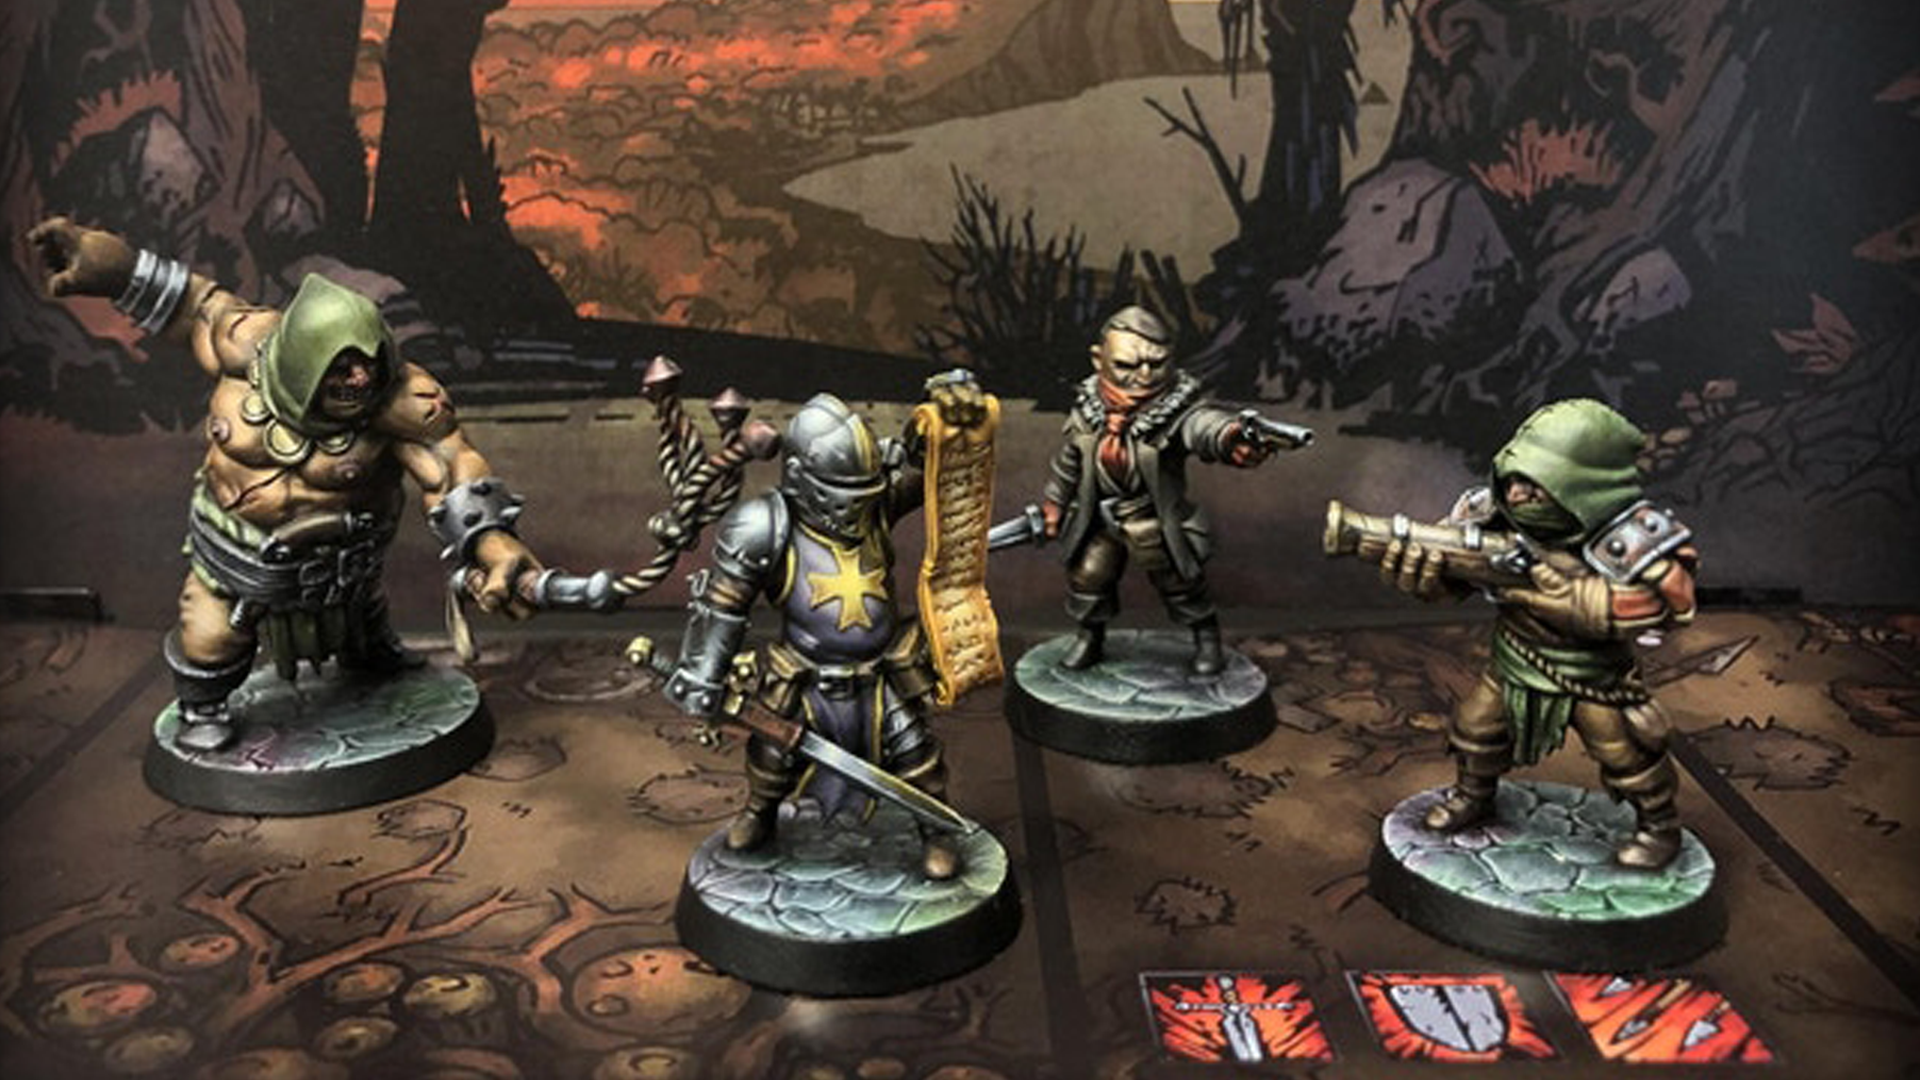 A close-up image of miniatures for Darkest Dungeon: The Board Game.